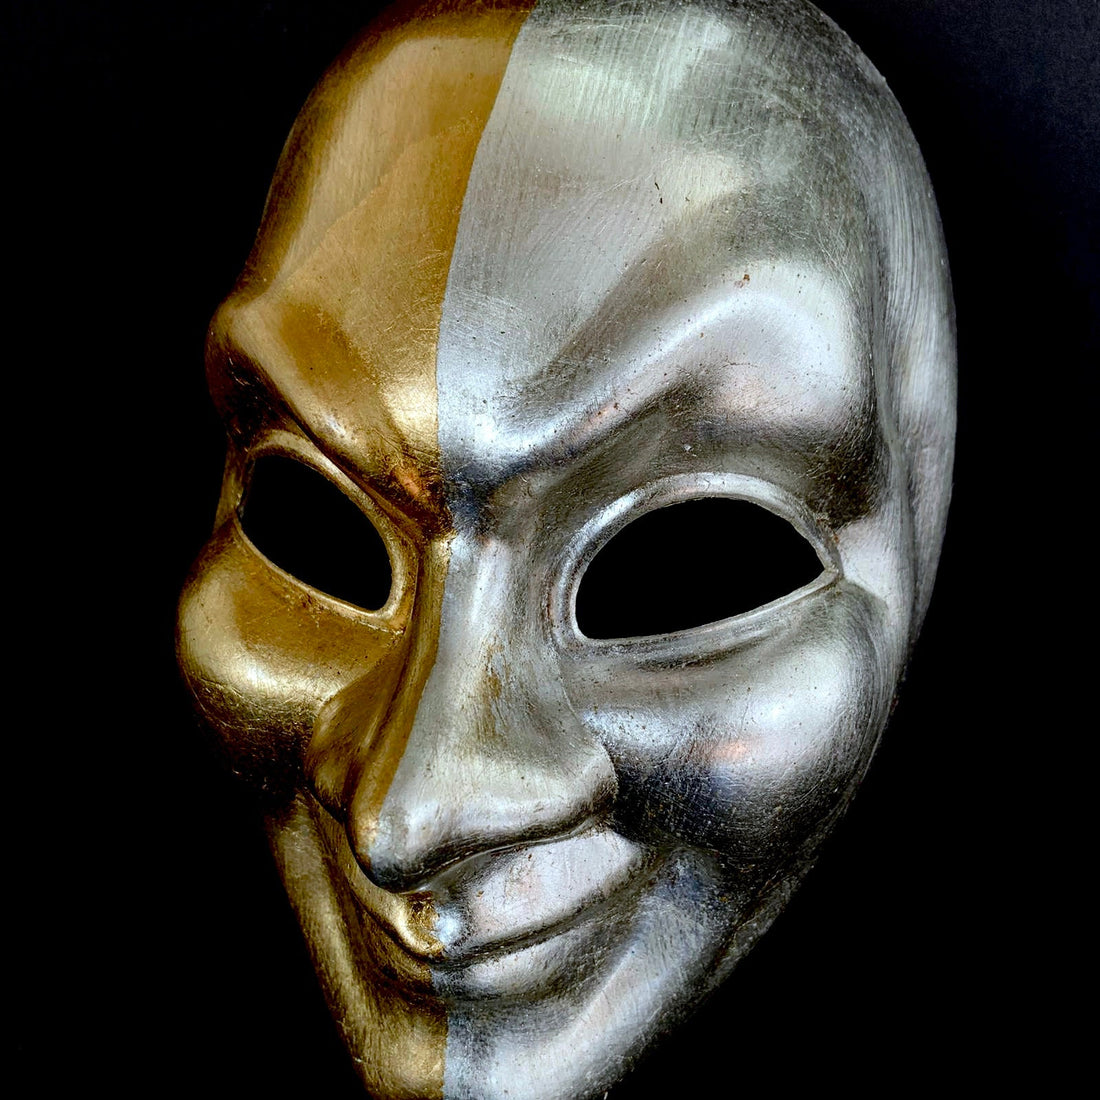 Comedy Venetian full face masquerade mask in a split color of gold and silver 